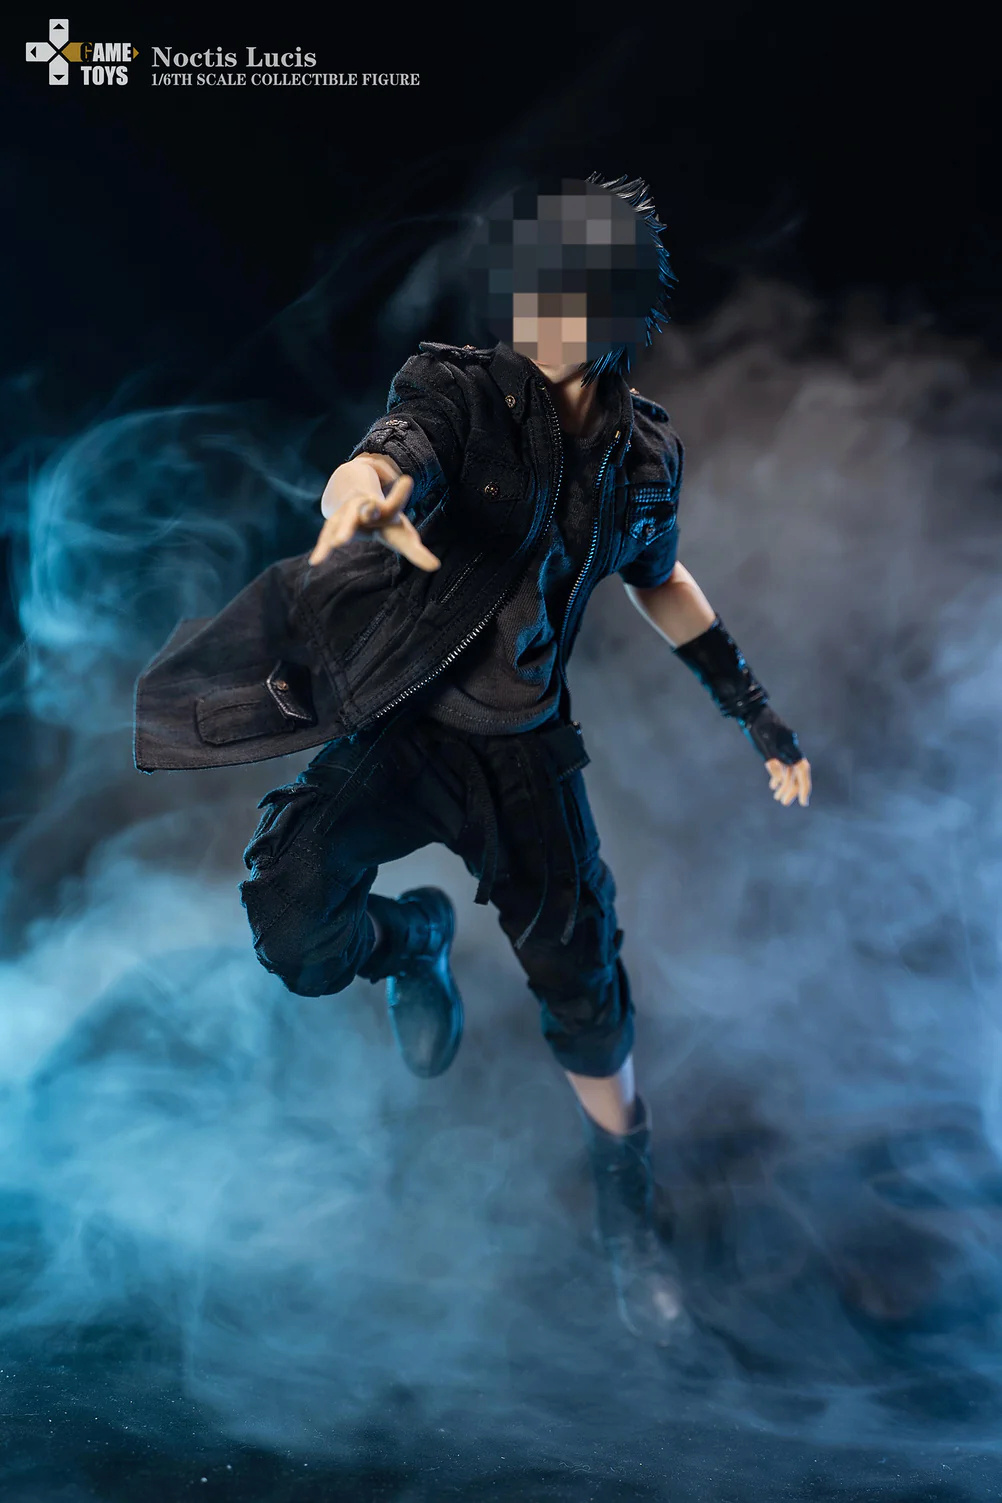 GameToys - NEW PRODUCT: Gametoys Noctis Lucis, additional accessories, and throne 05_web11